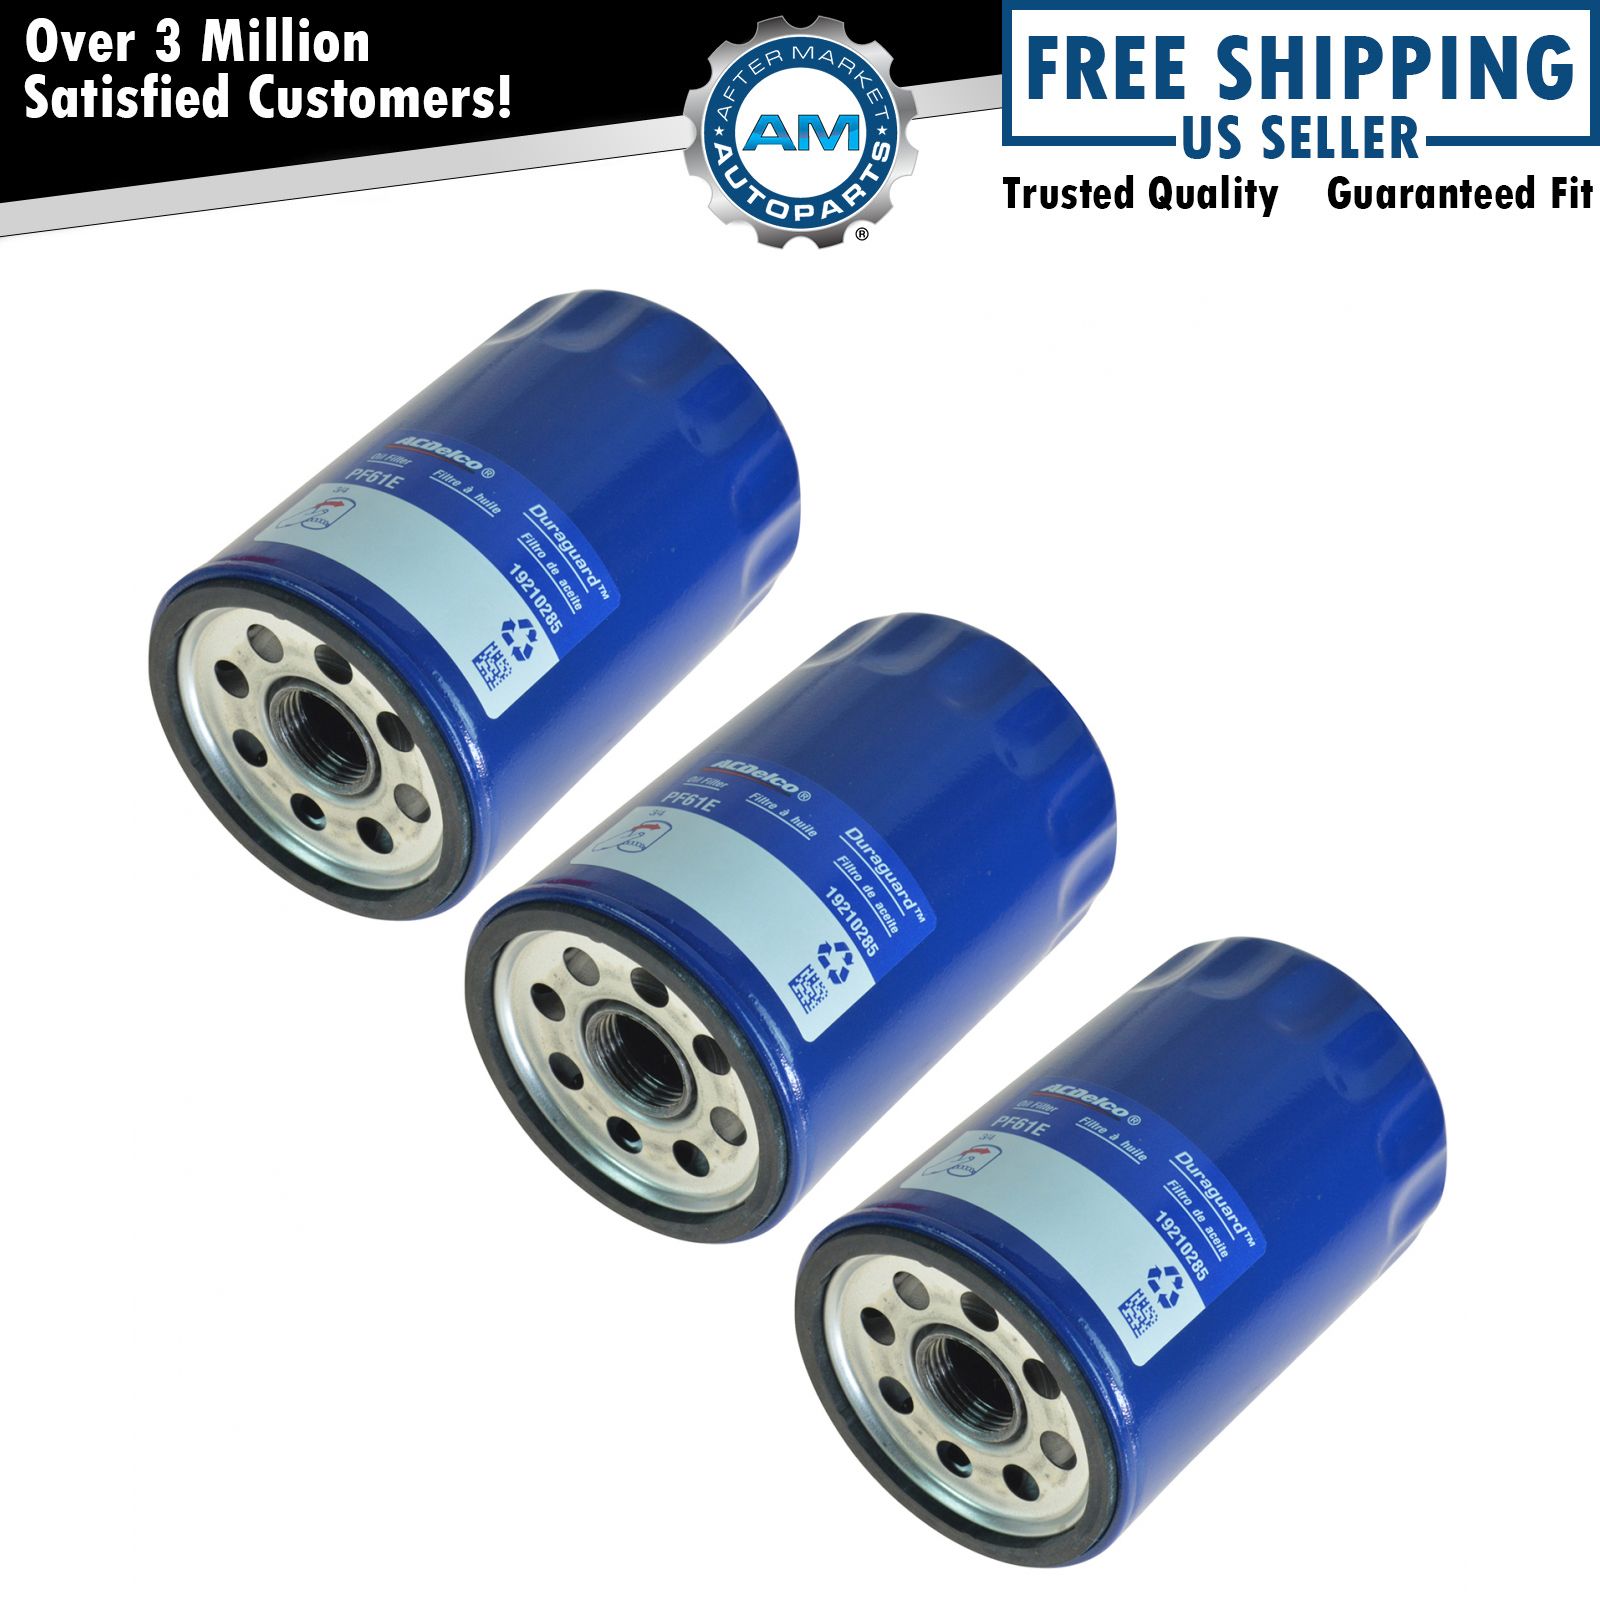 AC Delco PF61F Engine Oil Filter Set of 3 for Chevy Olds Buick Pontiac Saturn